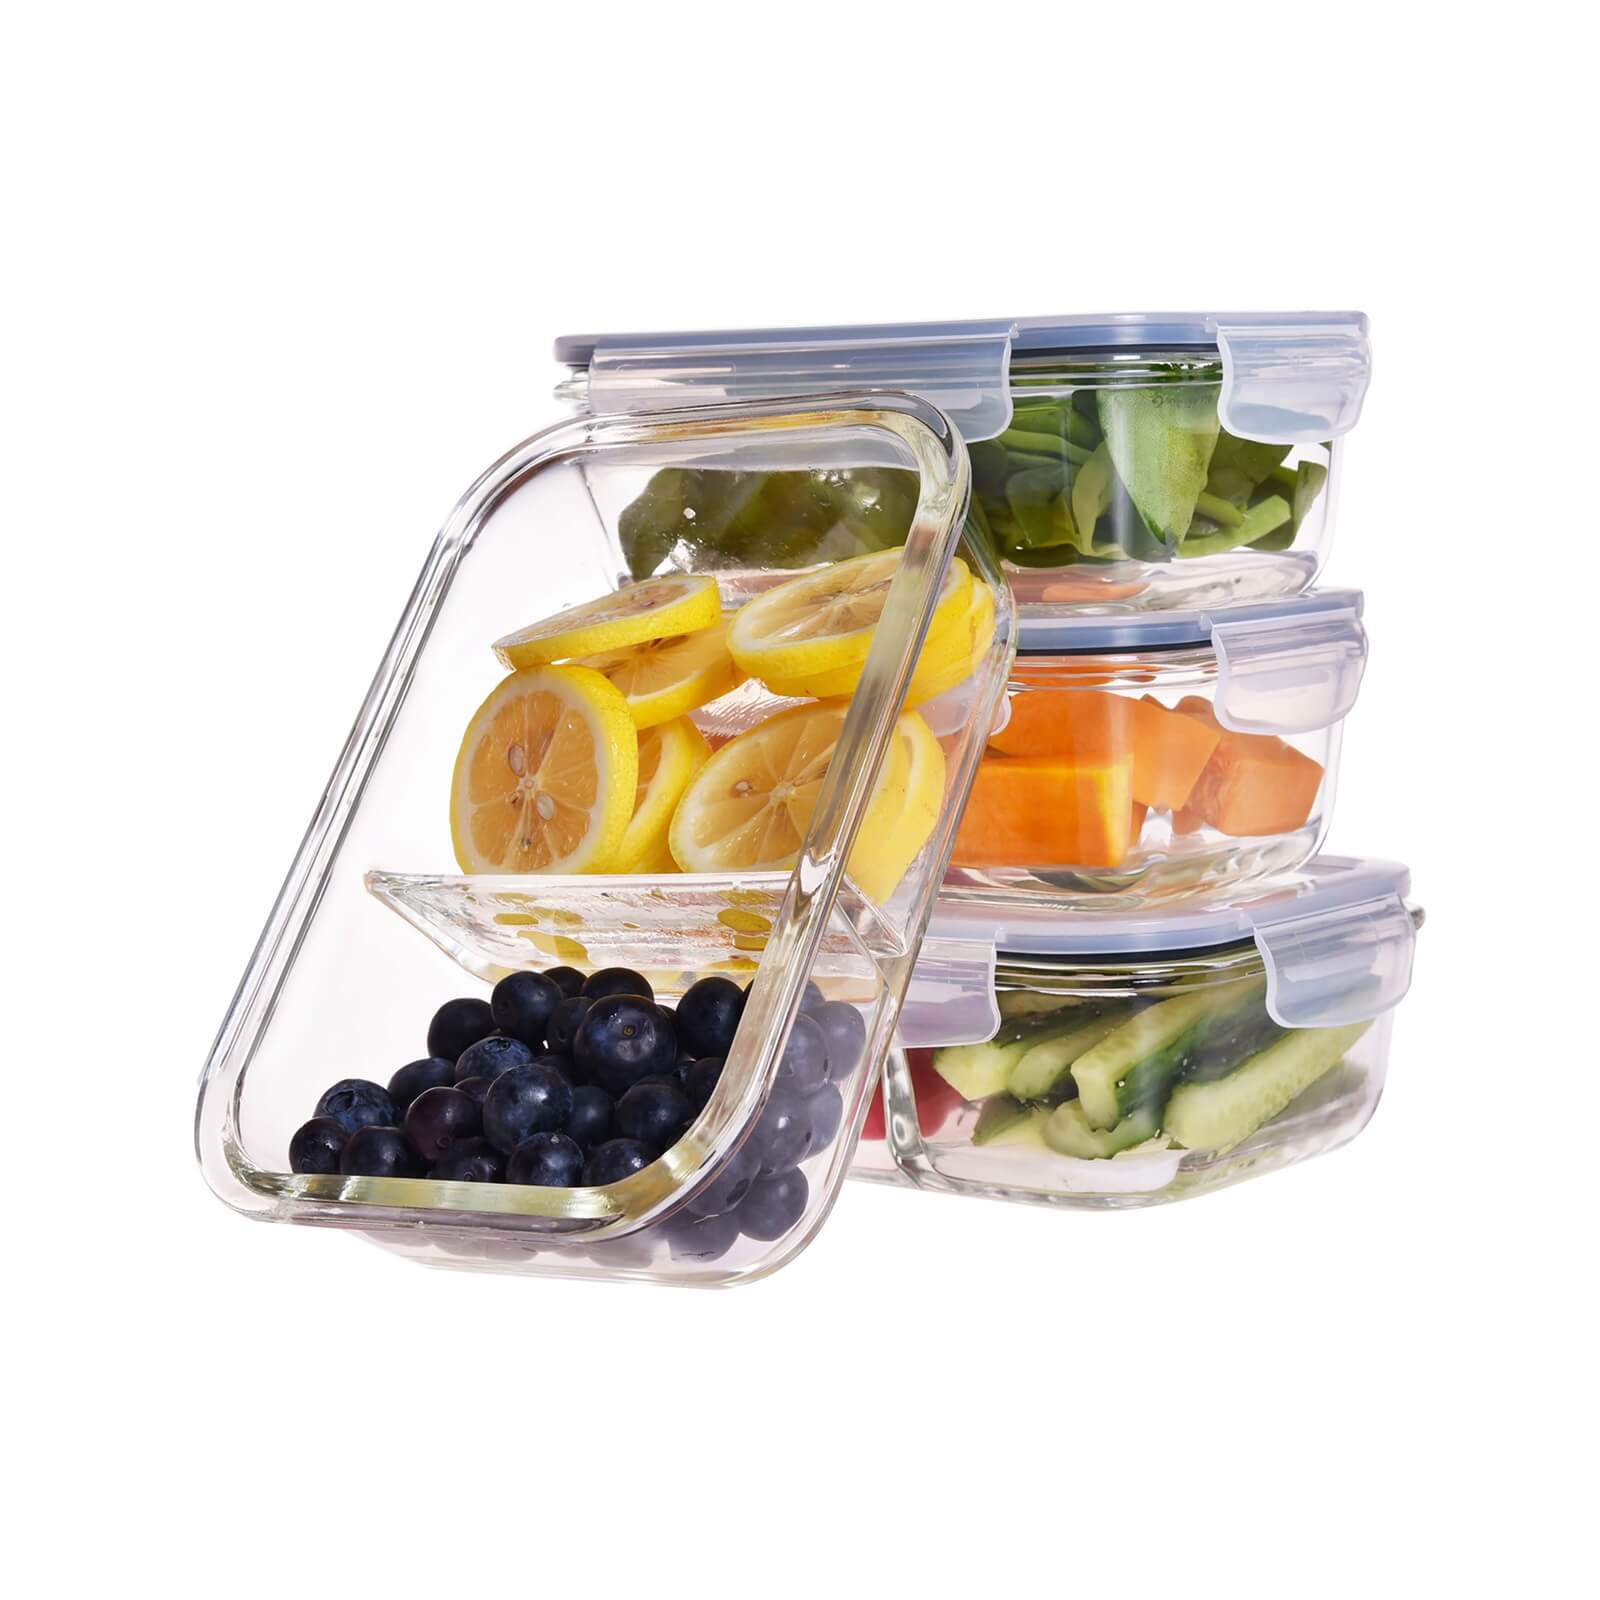 Glass Food Containers - 4 Piece Set